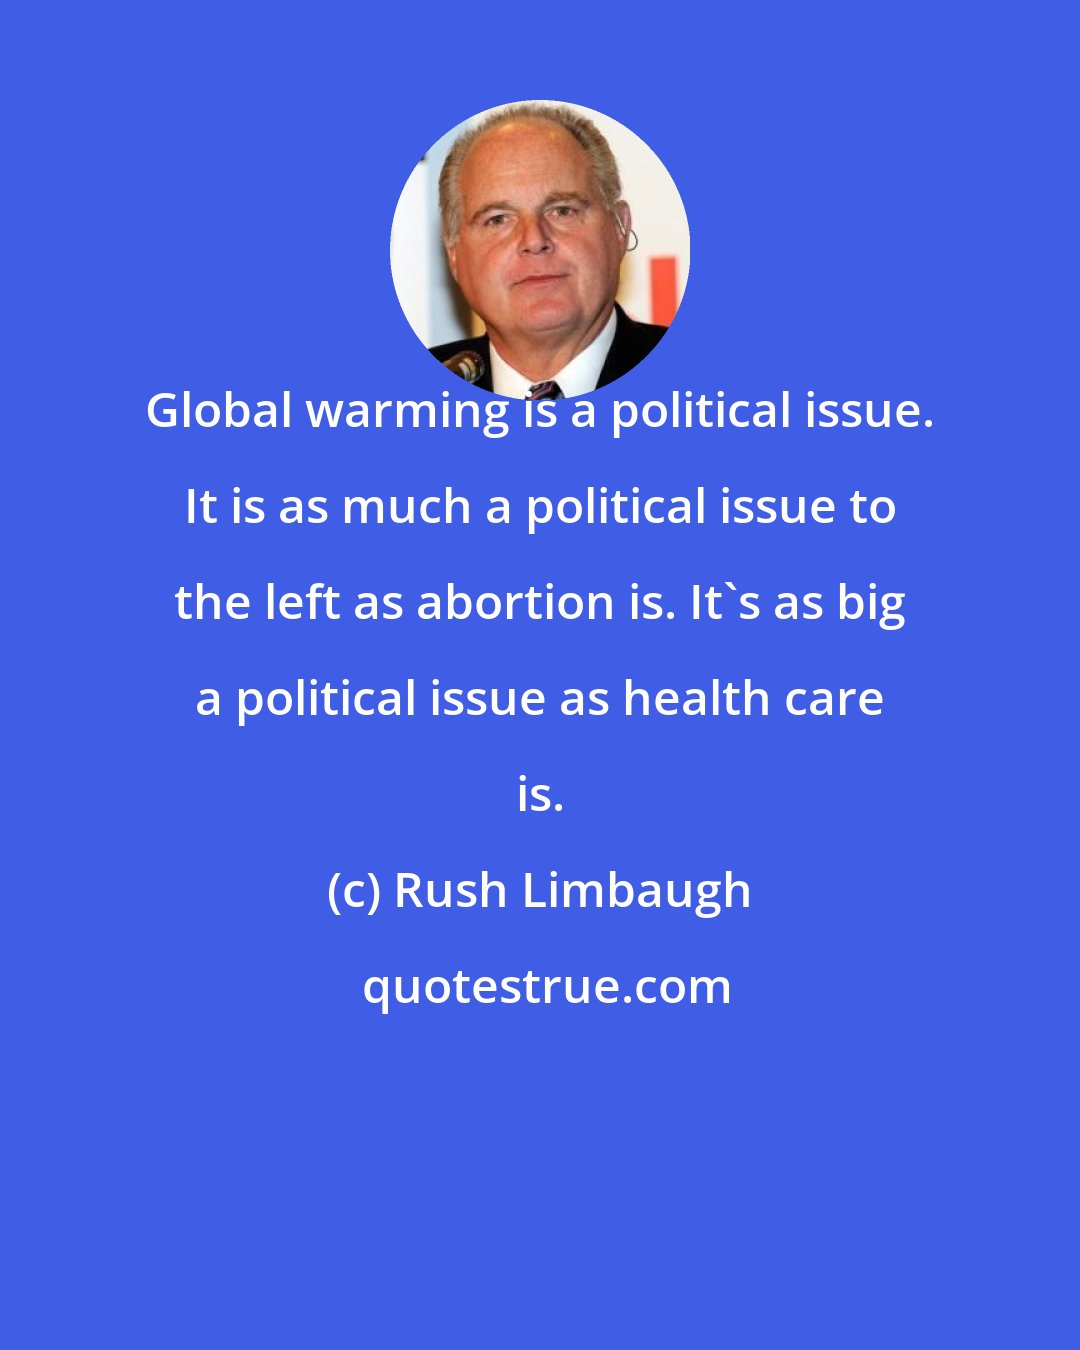 Rush Limbaugh: Global warming is a political issue. It is as much a political issue to the left as abortion is. It's as big a political issue as health care is.